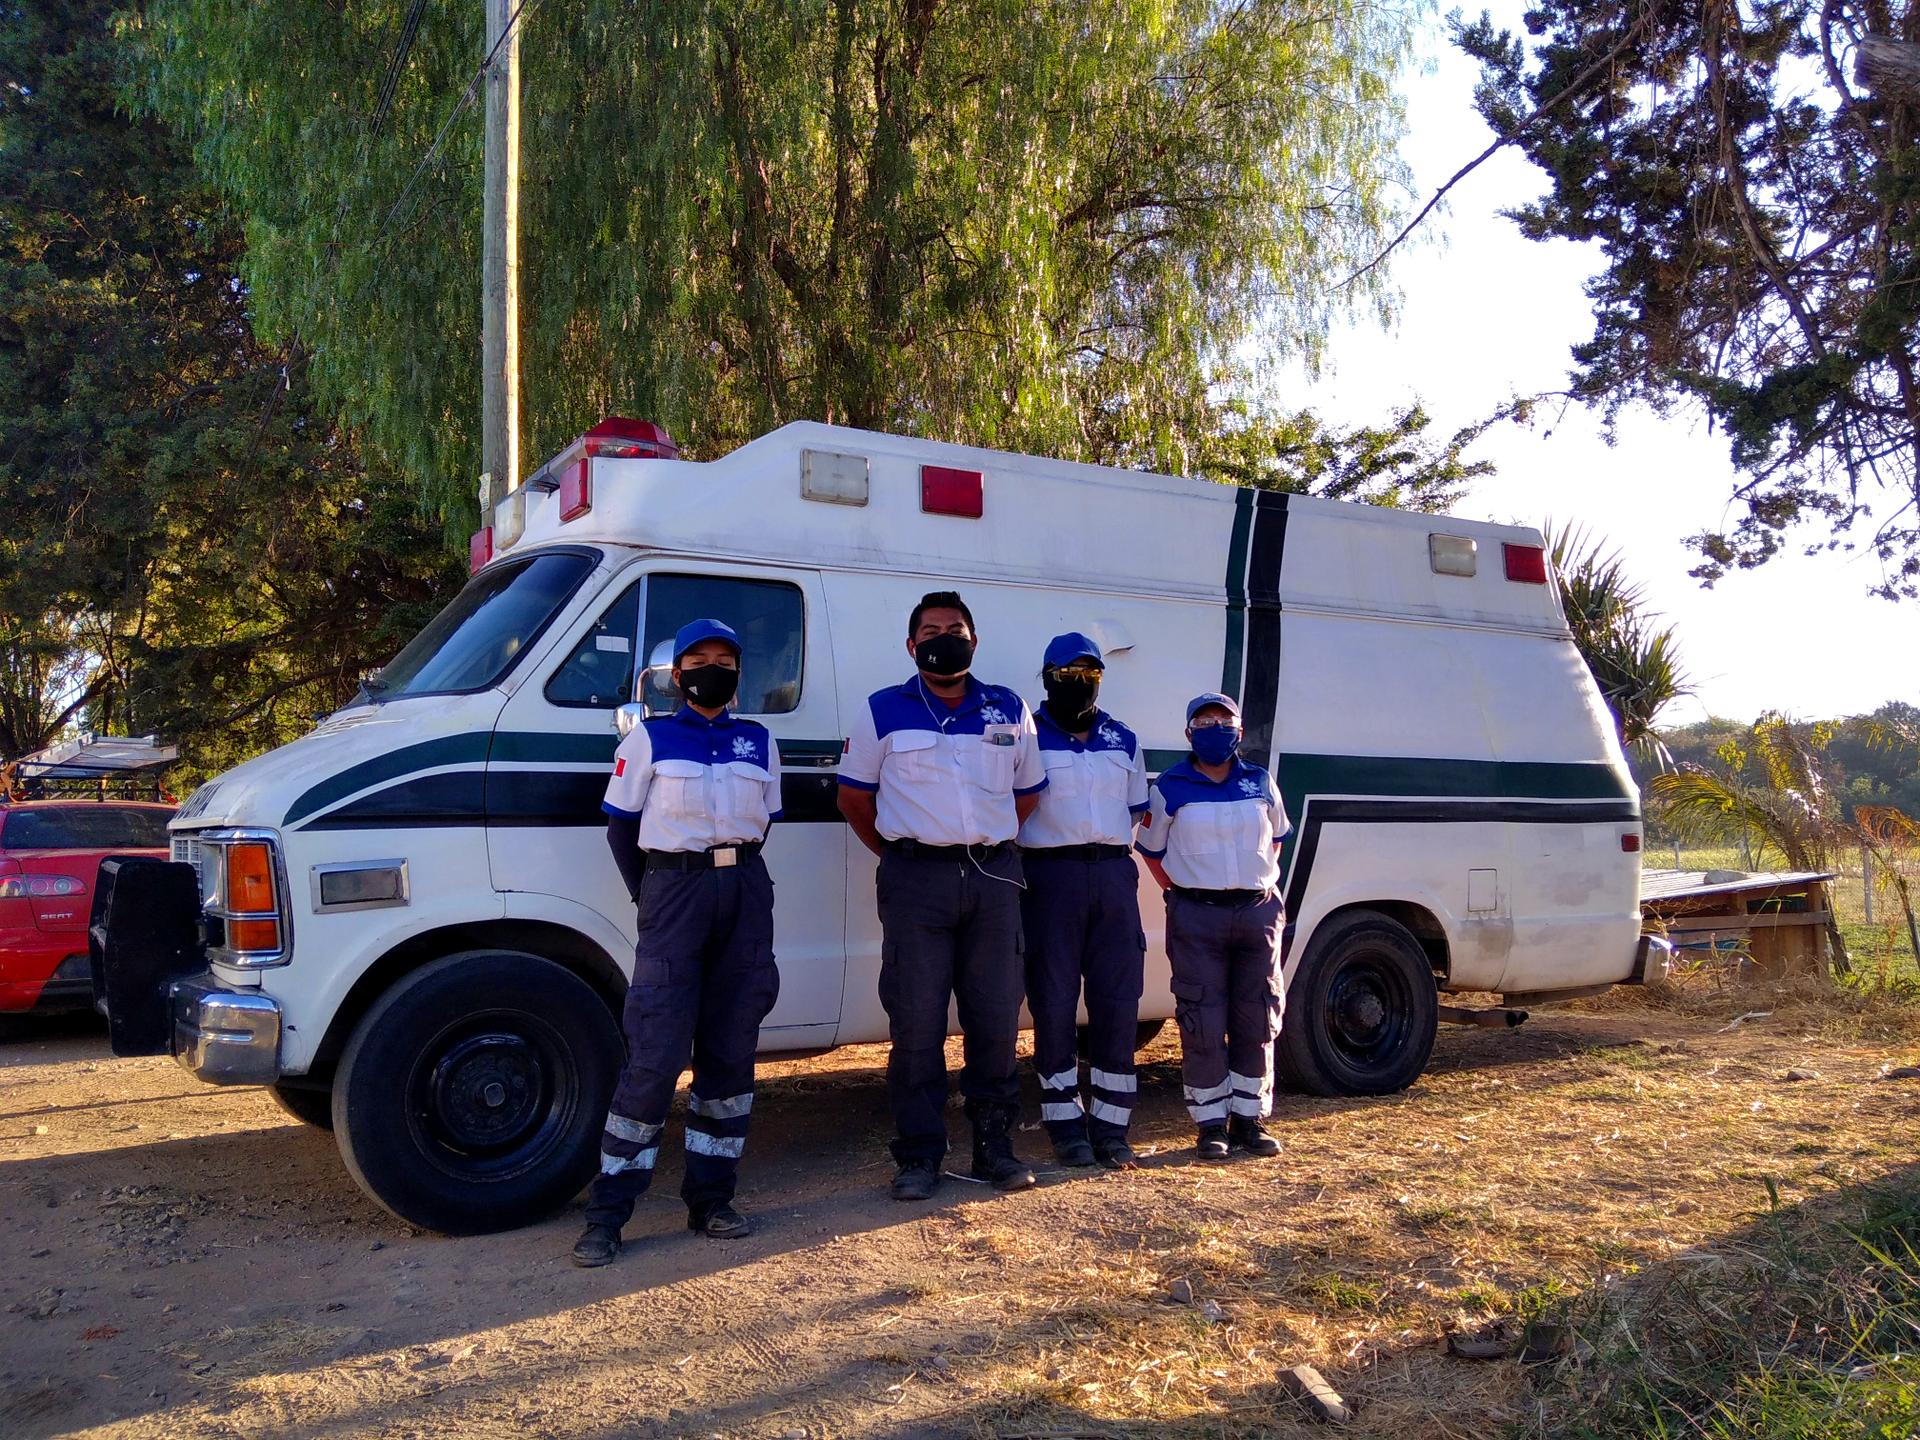 Josué Martínez and other members of the Brigadas ARVU volunteer paramedic crew park their ambulance by the side of the highway and ask for donations at stop lights when they're not responding to accidents or administering first aid.